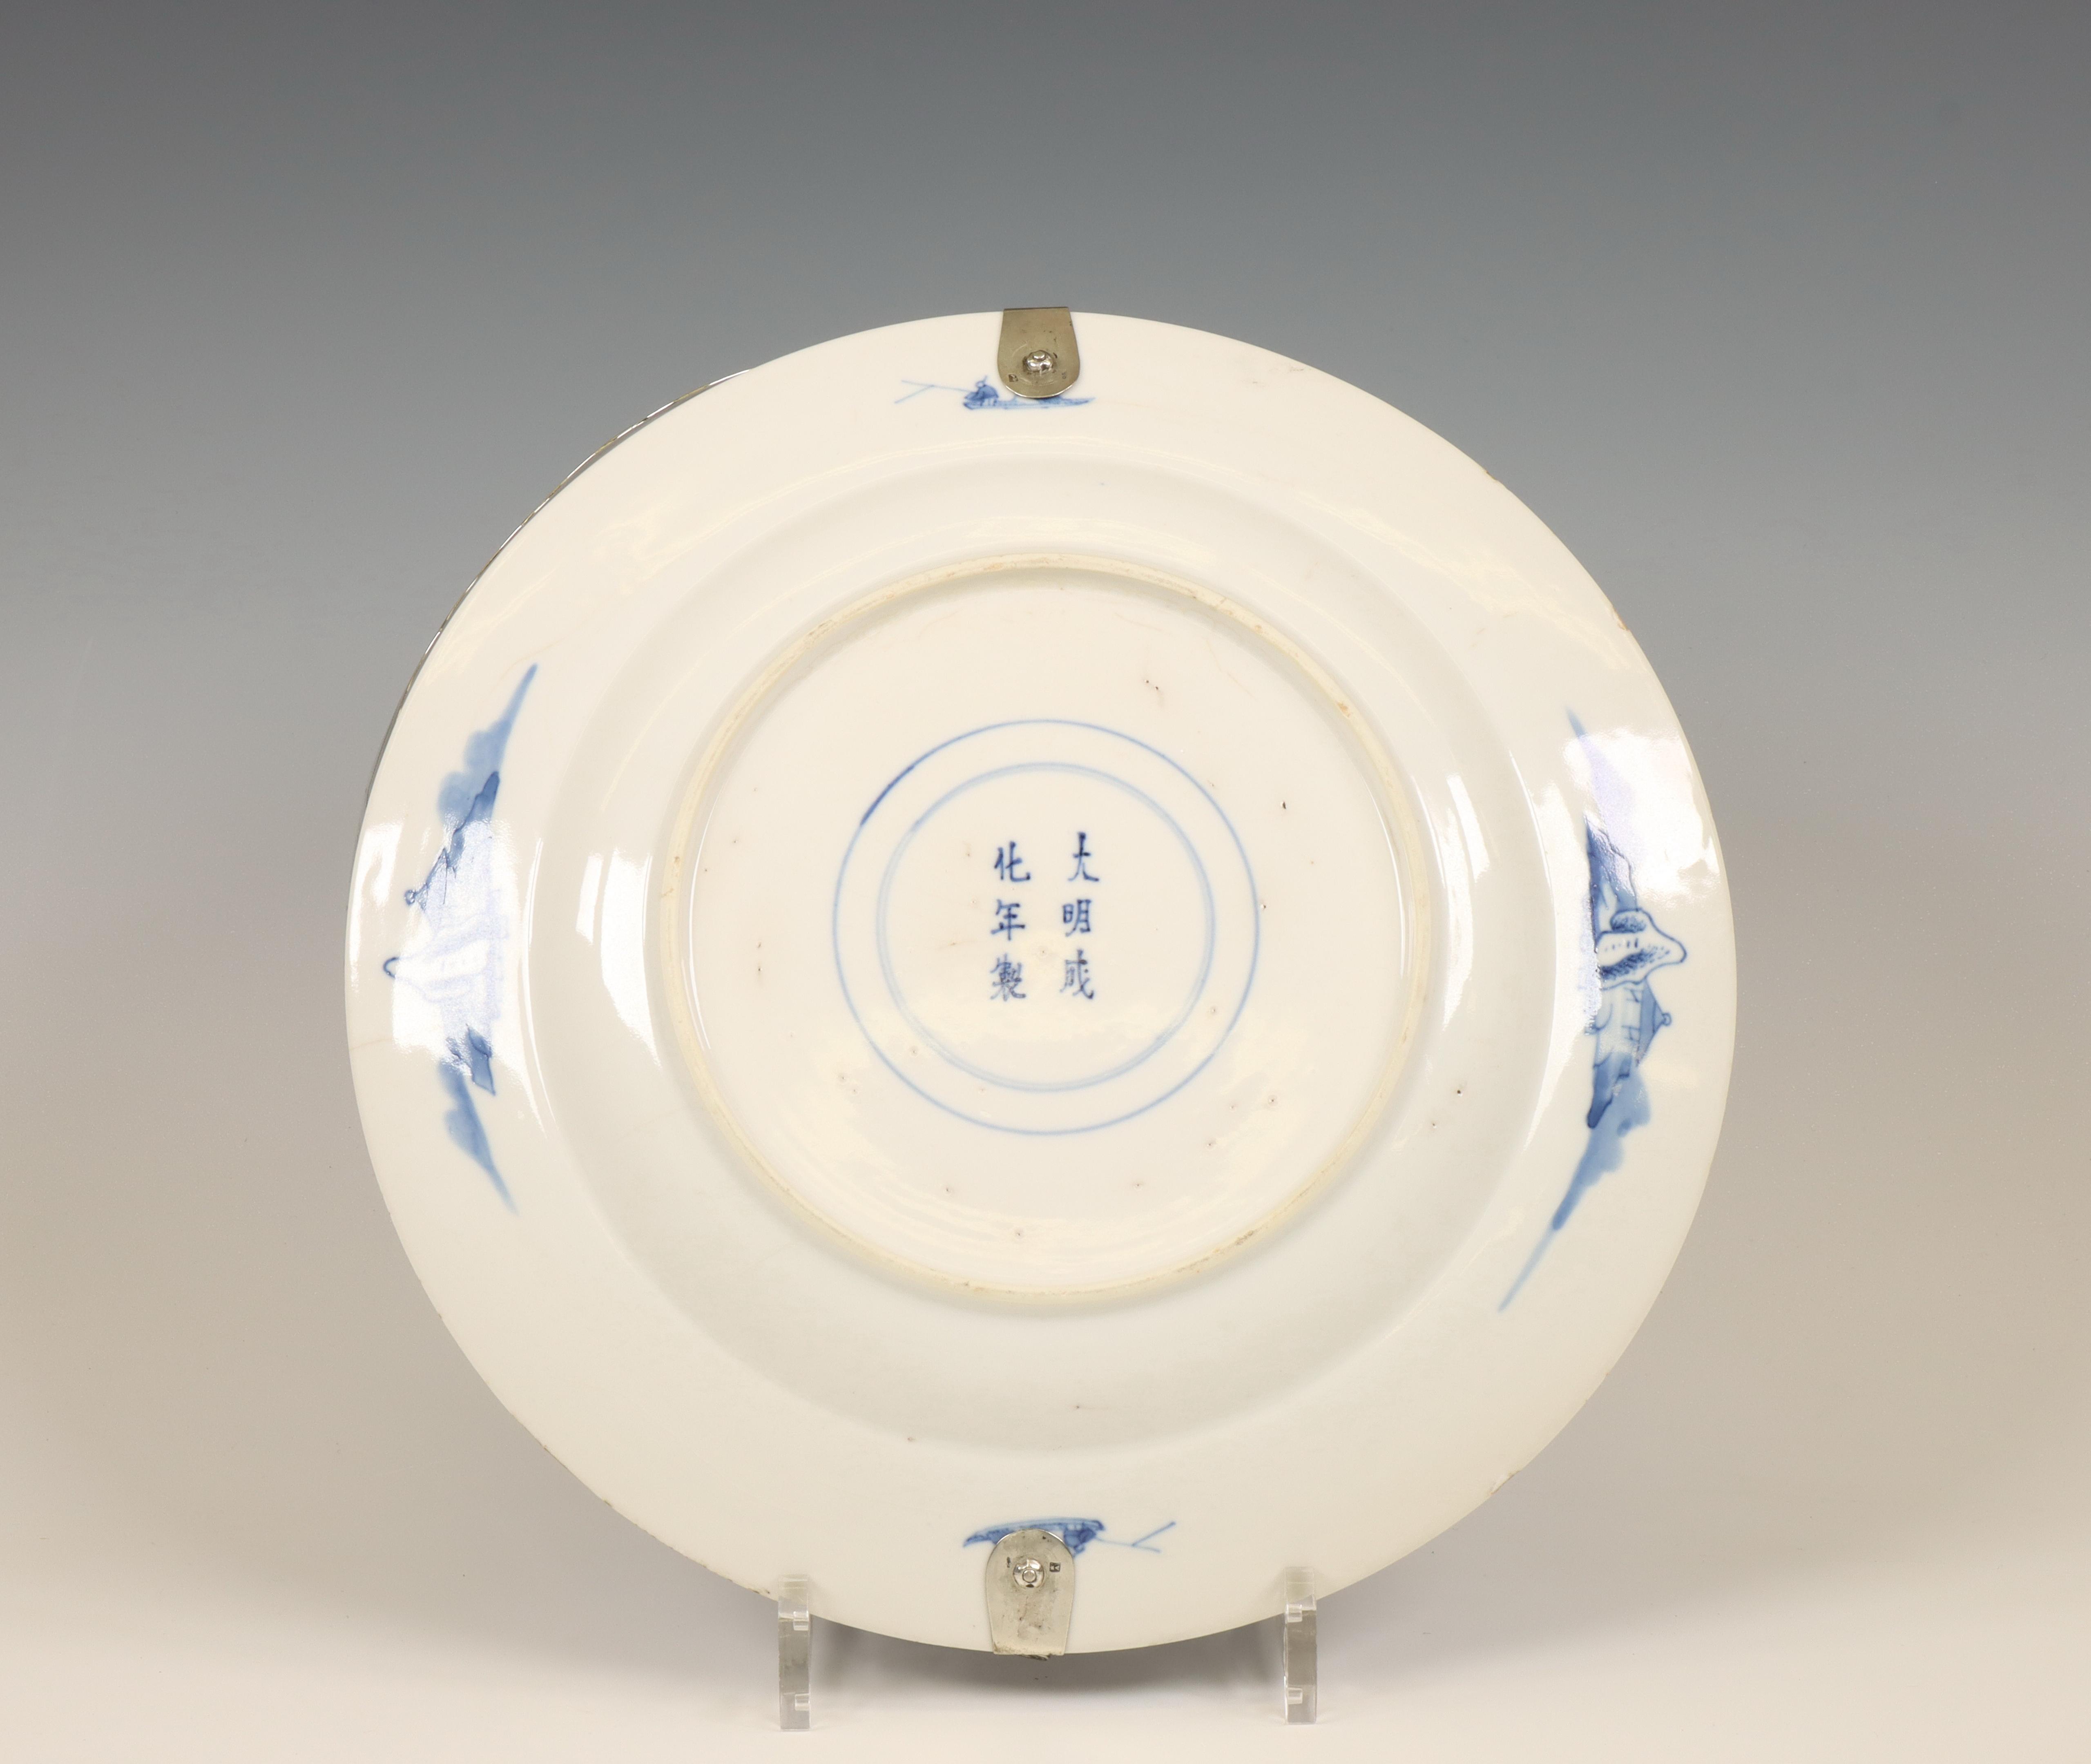 China, silver-mounted blue and white porcelain dish, Kangxi period (1662-1722), the Dutch silver 19t - Image 2 of 3